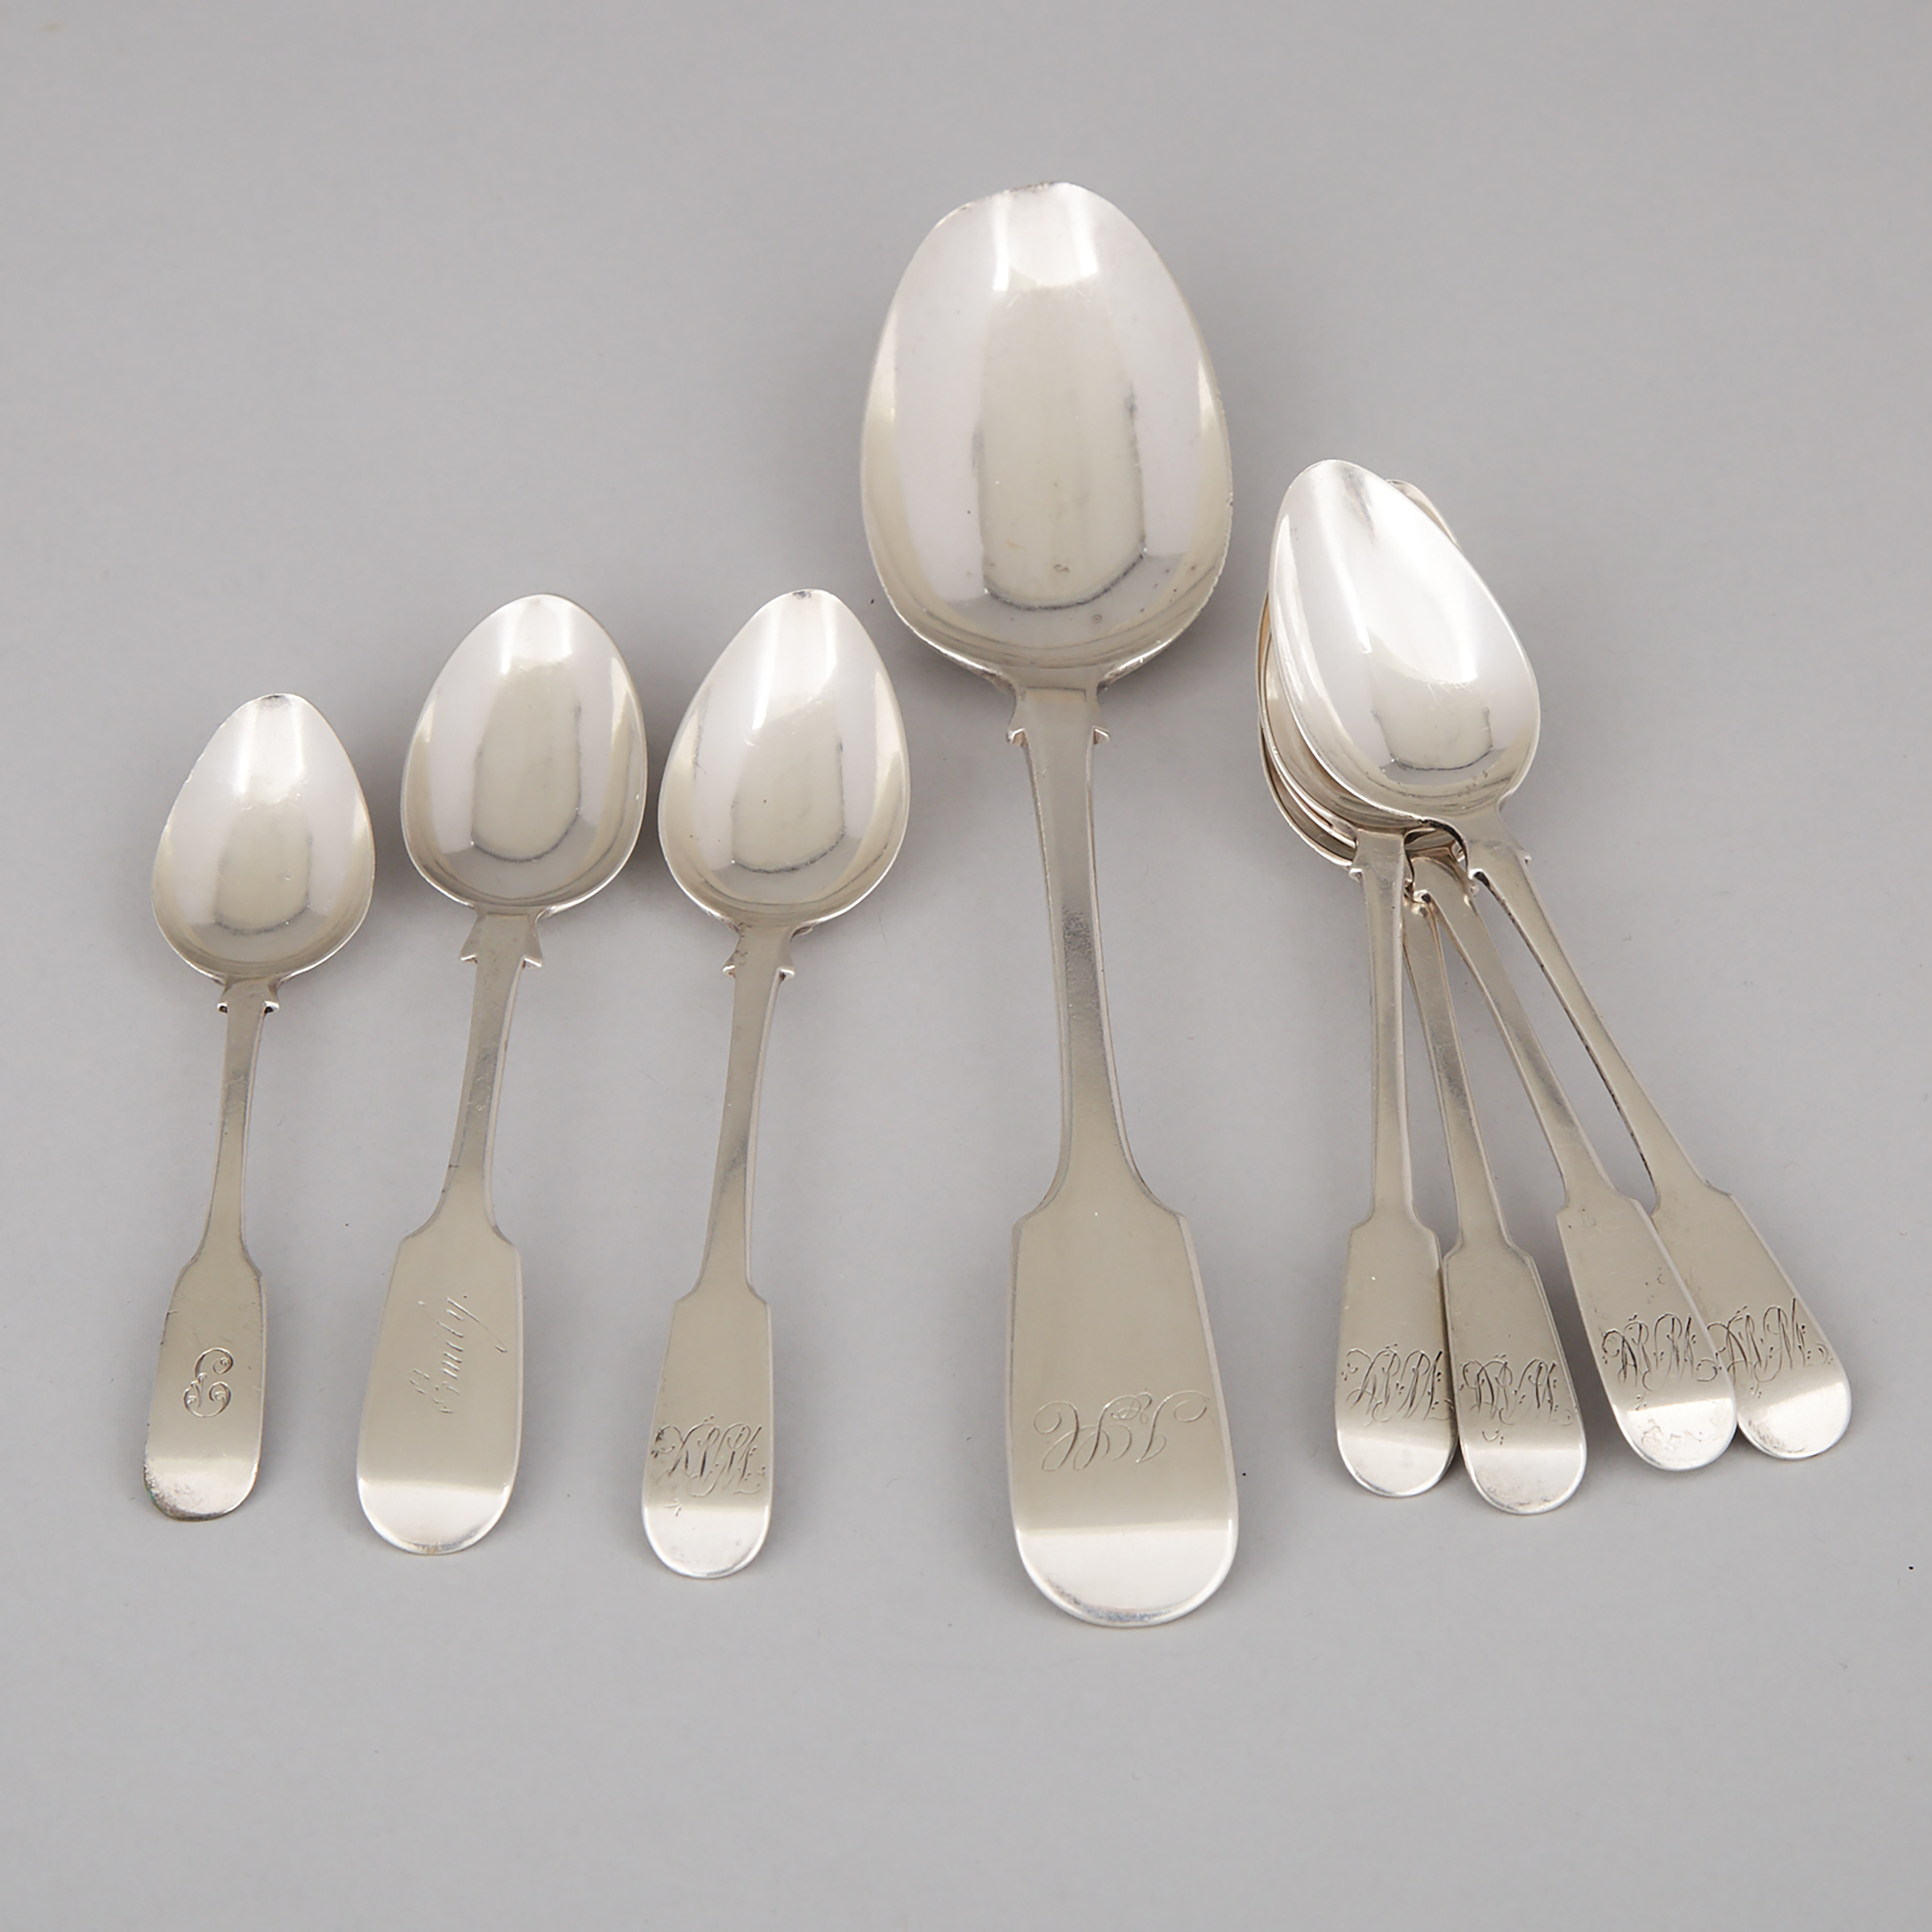 Canadian Silver Fiddle Pattern Table Spoon, Richard Kestell Oliver, Toronto, and Seven Tea Spoons, Nelson Walker (5), Hendery and Leslie for Canadian Mfg. Co., (1), A.S. unidentified (1), Montreal, Que., 19th century